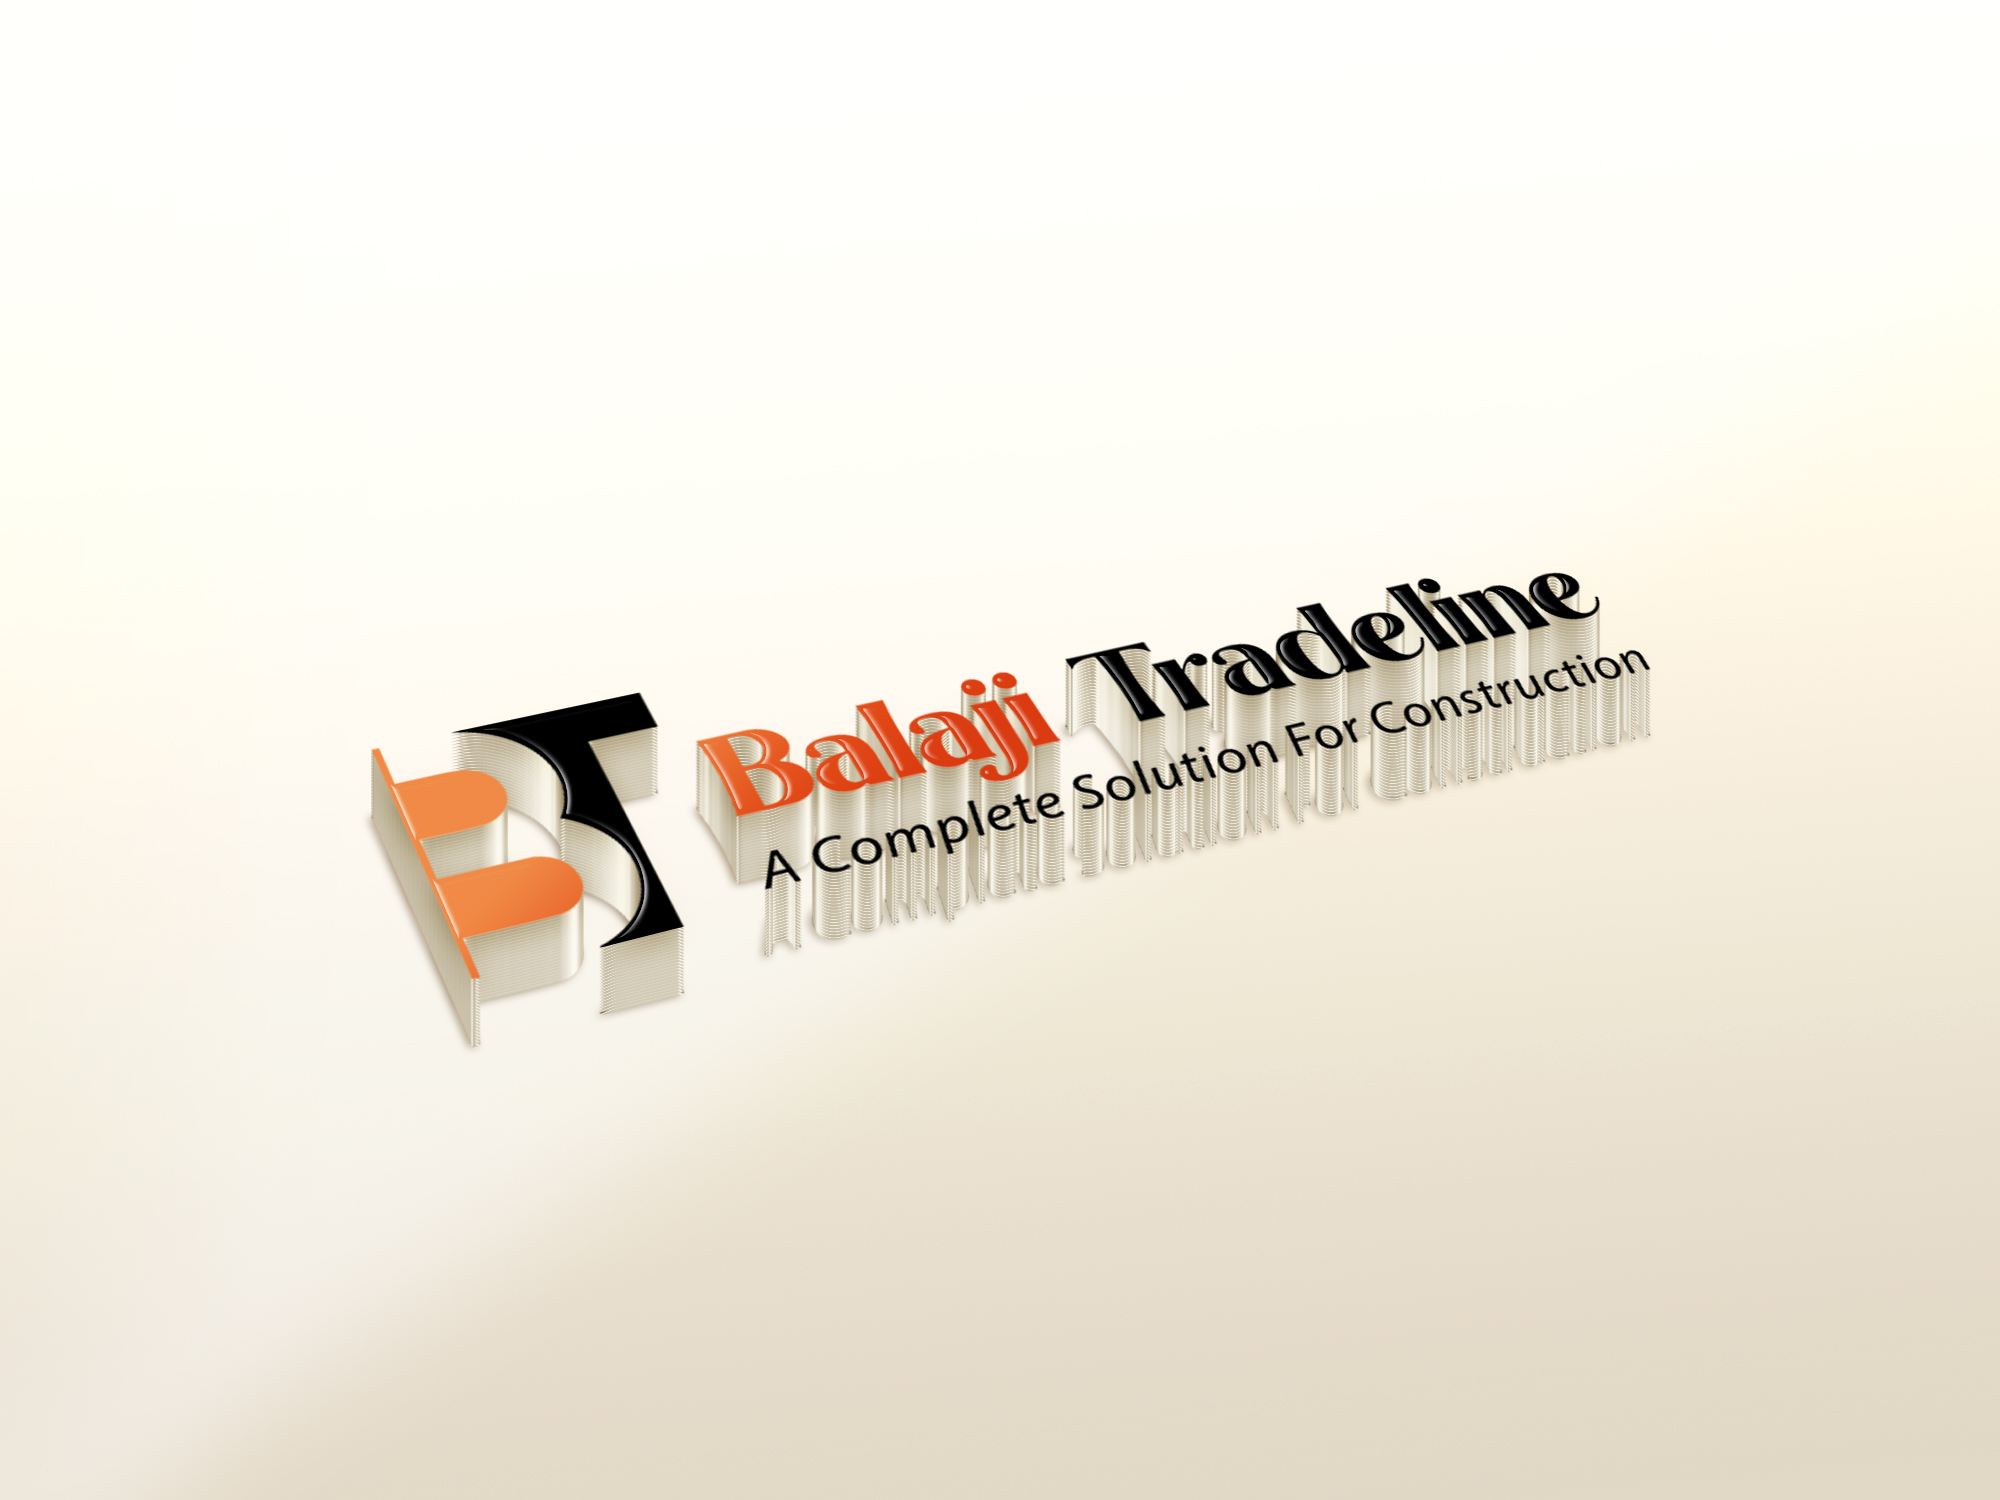 Balaji-Tradeline - xpetrlab technologies private limited